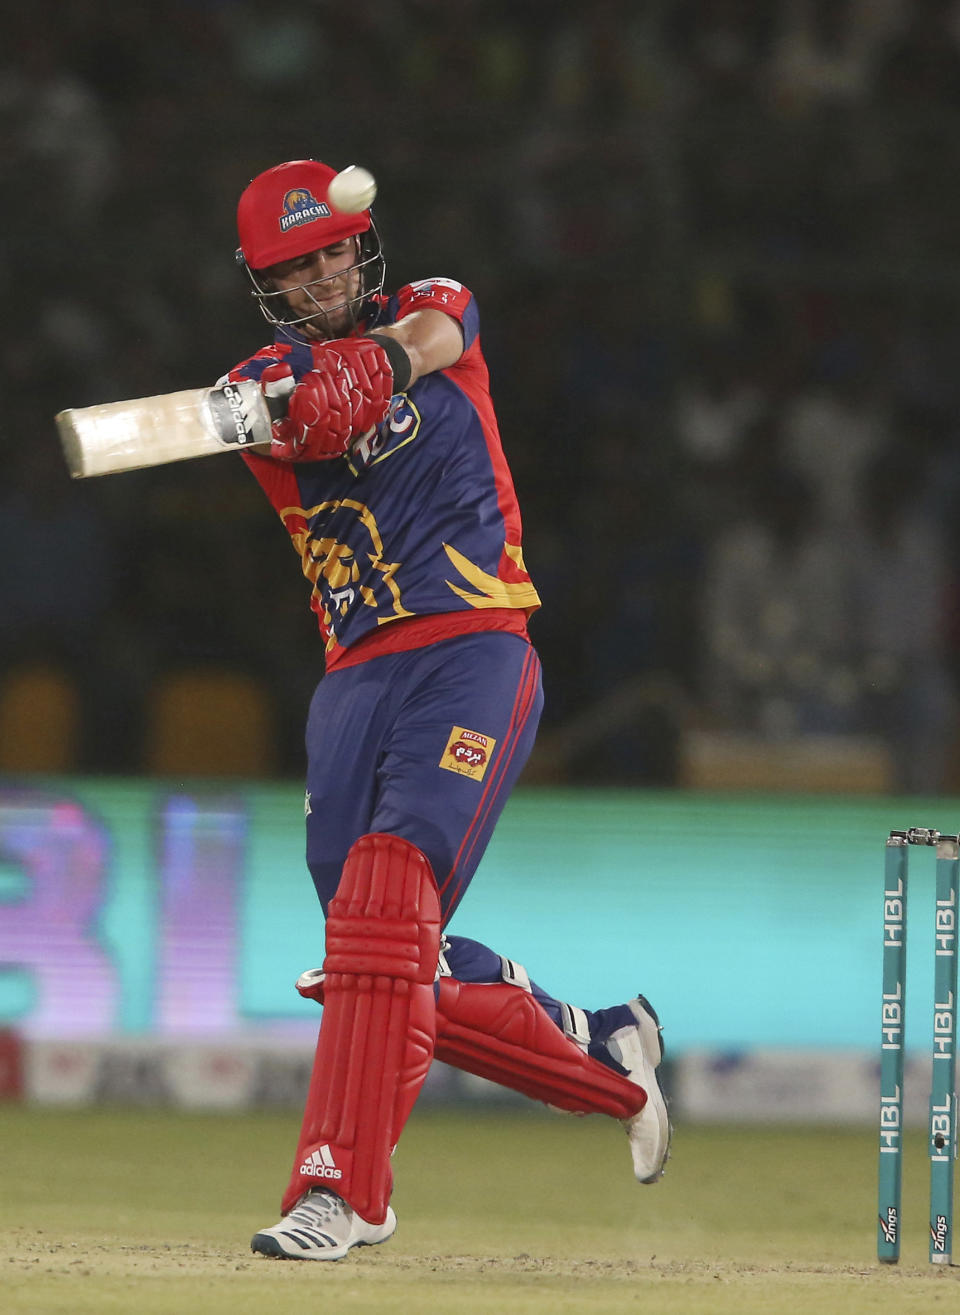 Liam Livingstone of Karachi Kings hits a boundary against Islamabad United, in the Pakistan Super League playoff at National Stadium in Karachi, Pakistan, Thursday, March 14, 2019. (AP Photo/Fareed Khan)